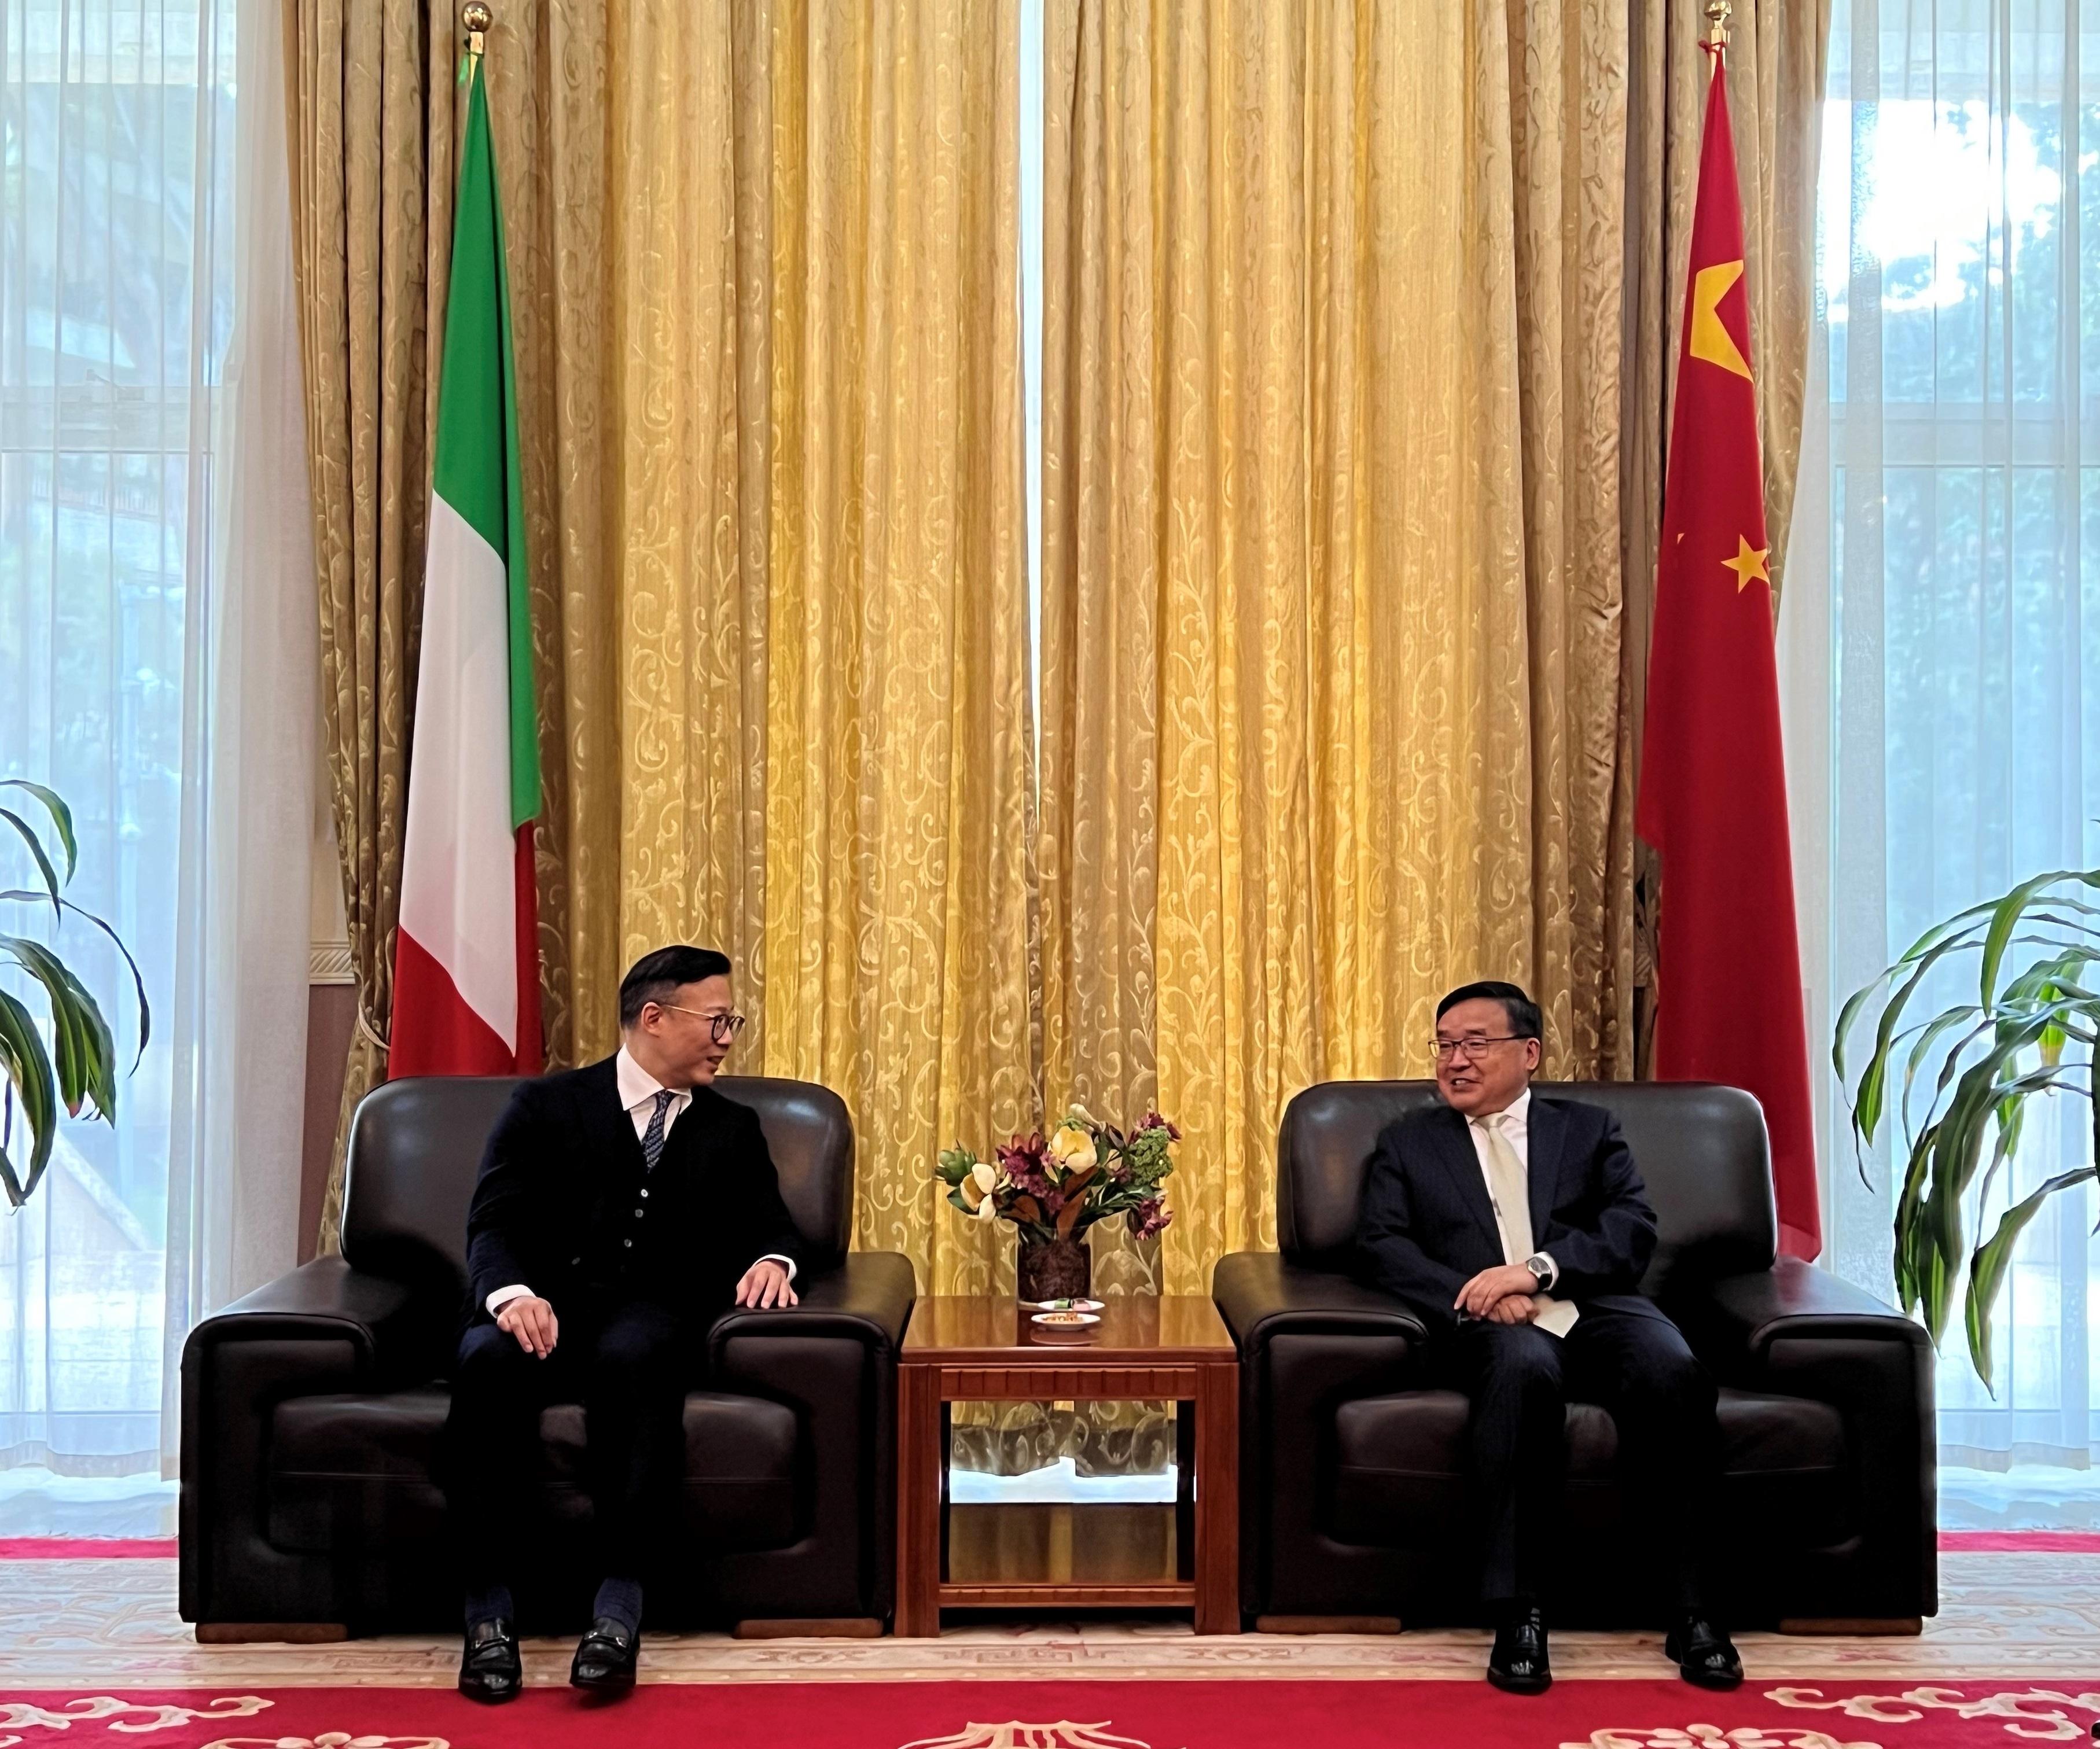 The Deputy Secretary for Justice, Mr Cheung Kwok-kwan (left), called on the Ambassador Extraordinary and Plenipotentiary of the People's Republic of China to the Republic of Italy, Mr Jia Guide (right), in Rome, Italy, on March 6 (Rome time).